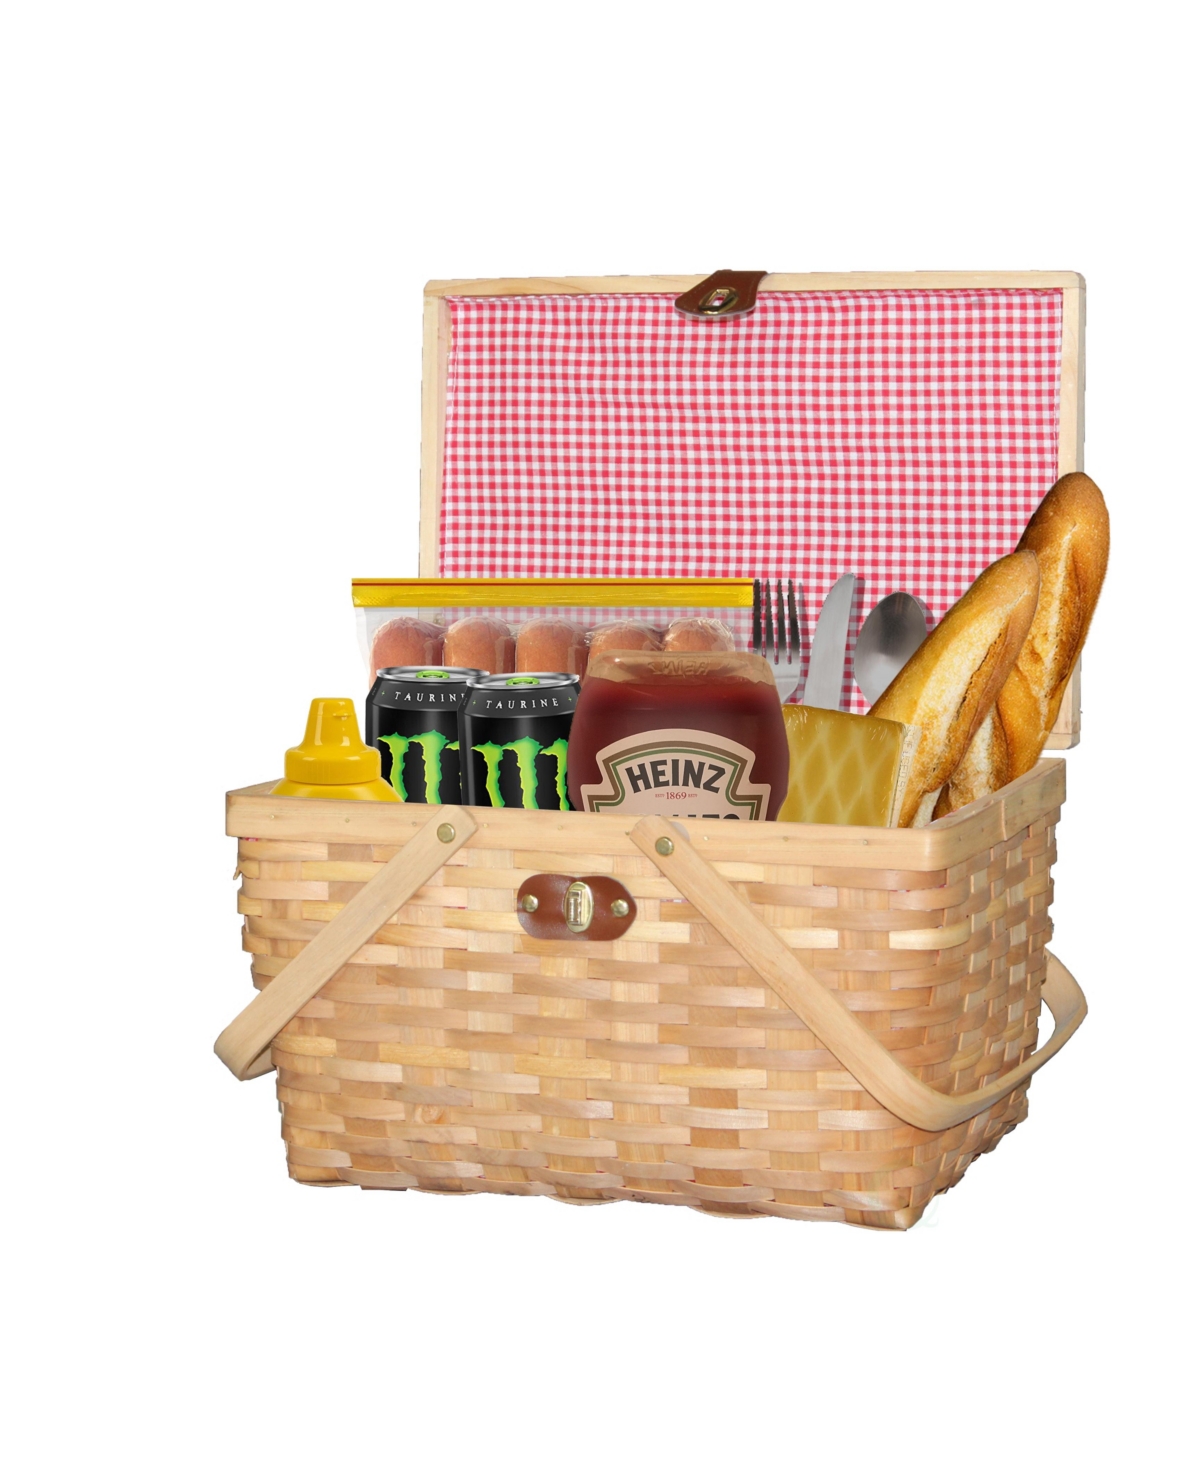 Gingham Lined Woodchip Picnic Basket With Lid and Movable Handles - Brown